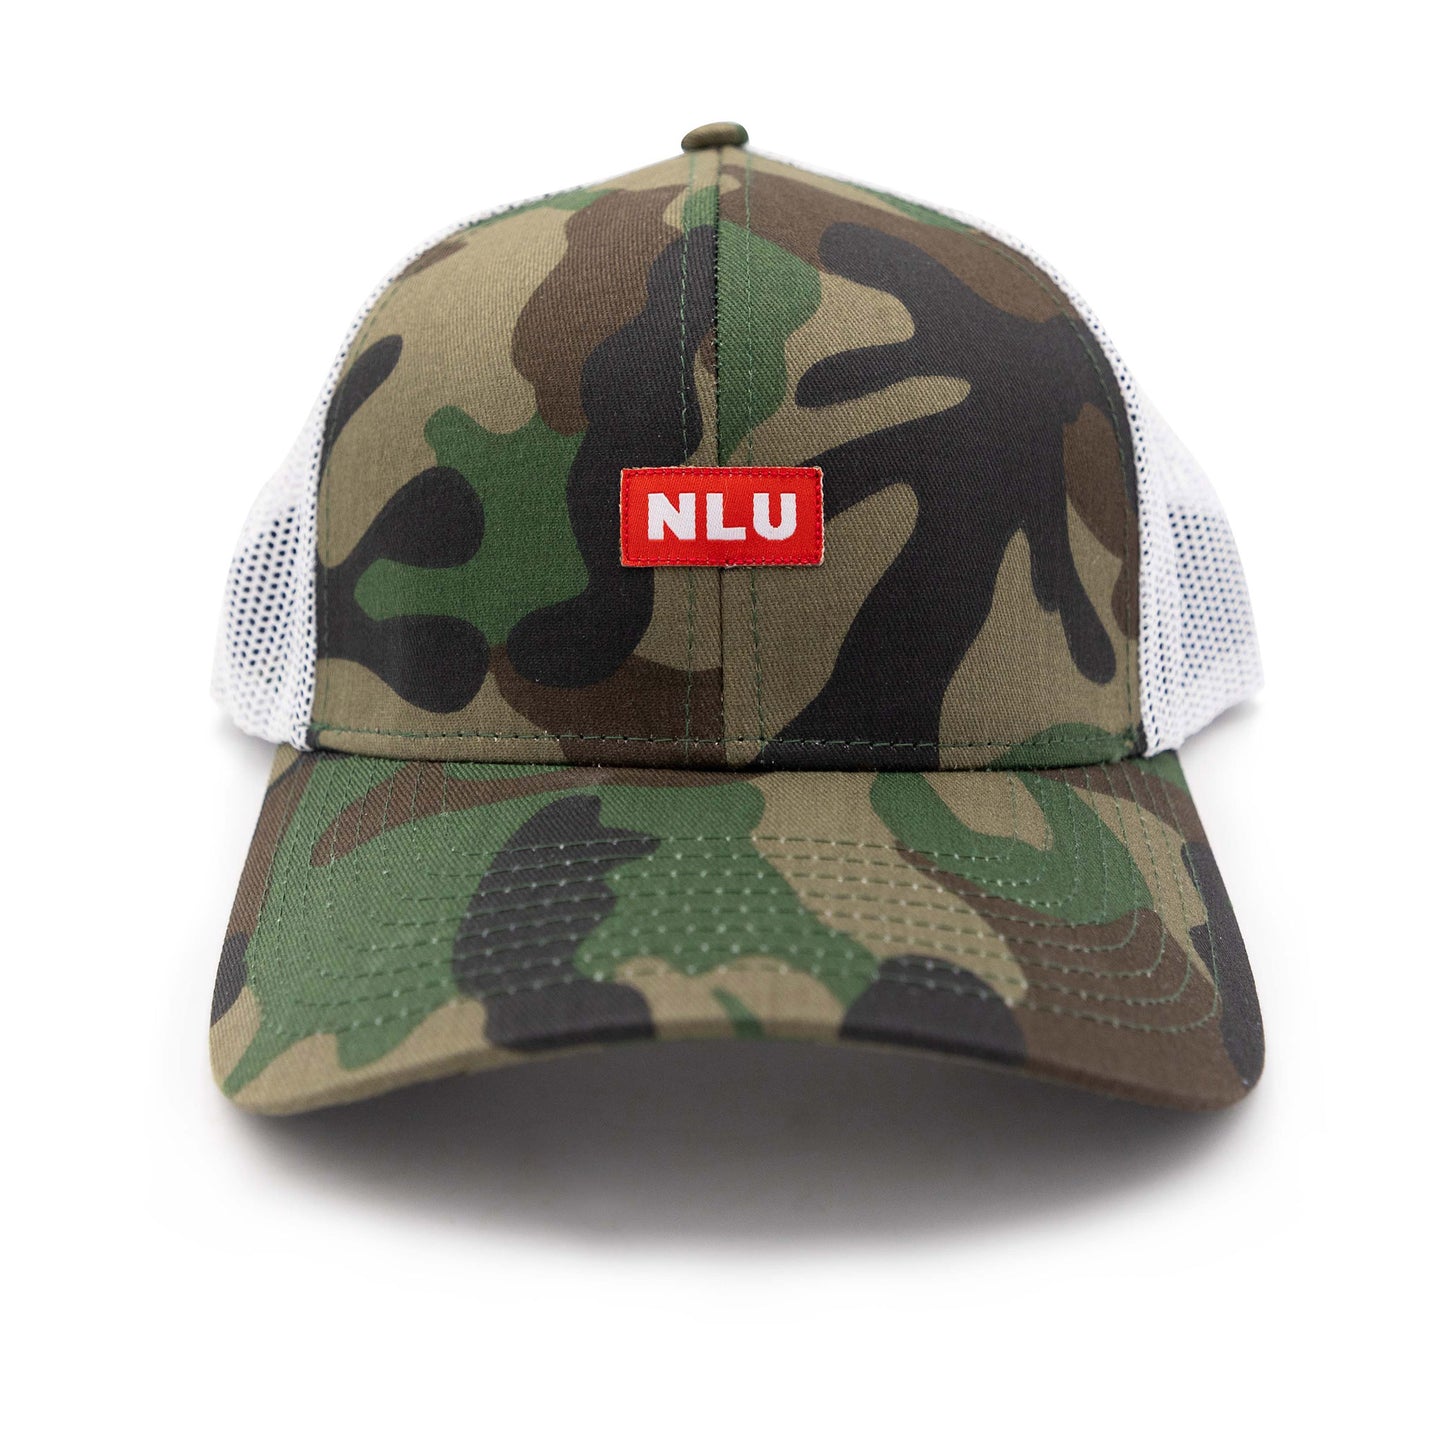 NLU Small Patch Hat | Red NLU Patch on Camo w/ White Mesh